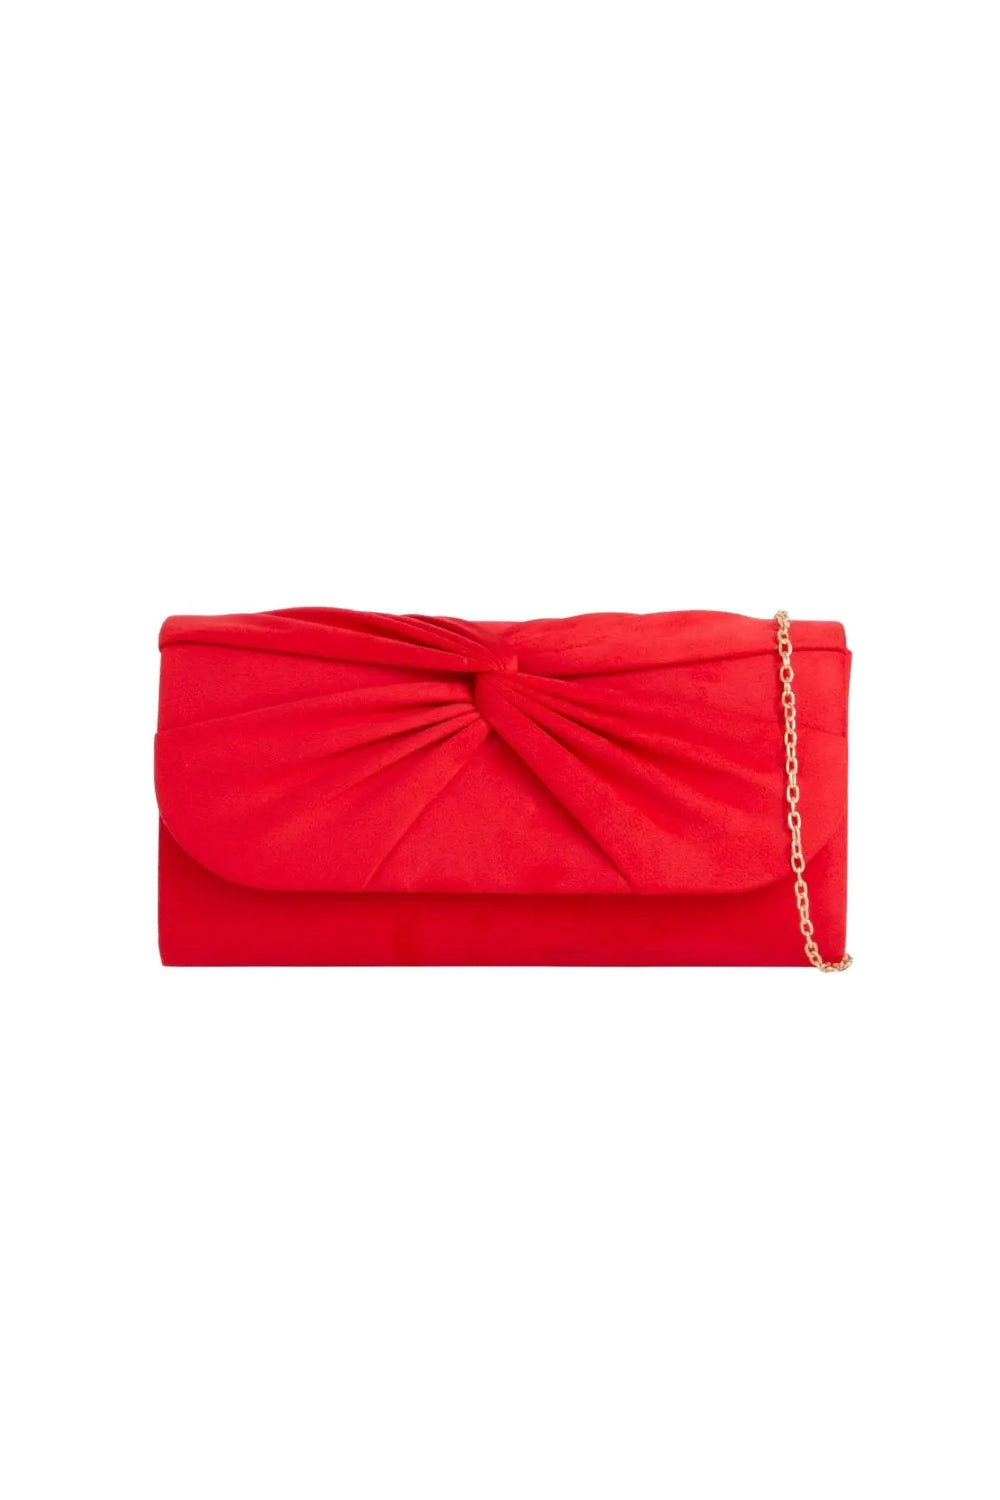 Red Suede Clutch Bag with Knot Detail